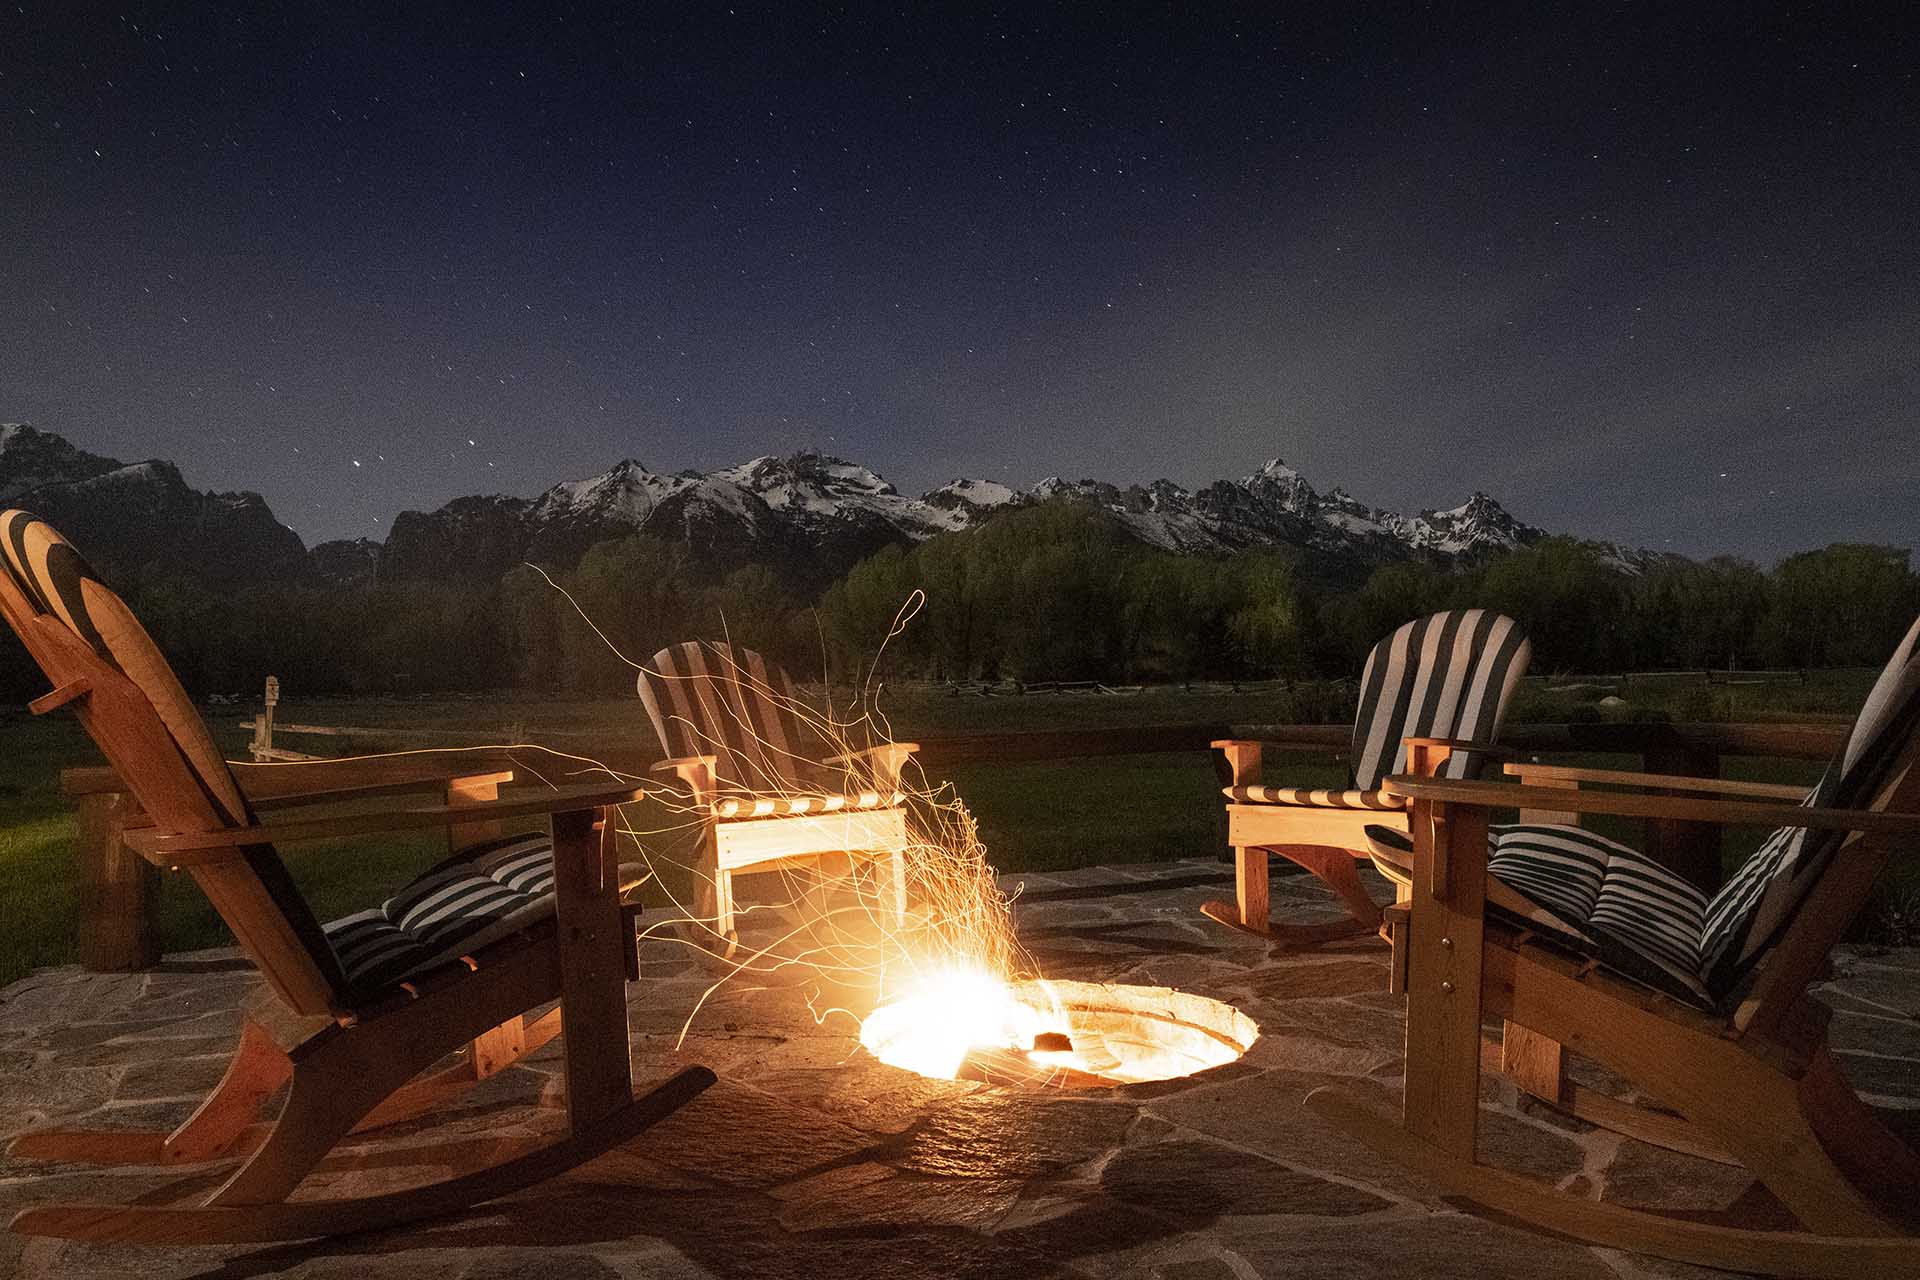 Starry Skies at the Jackson Hole Ranch